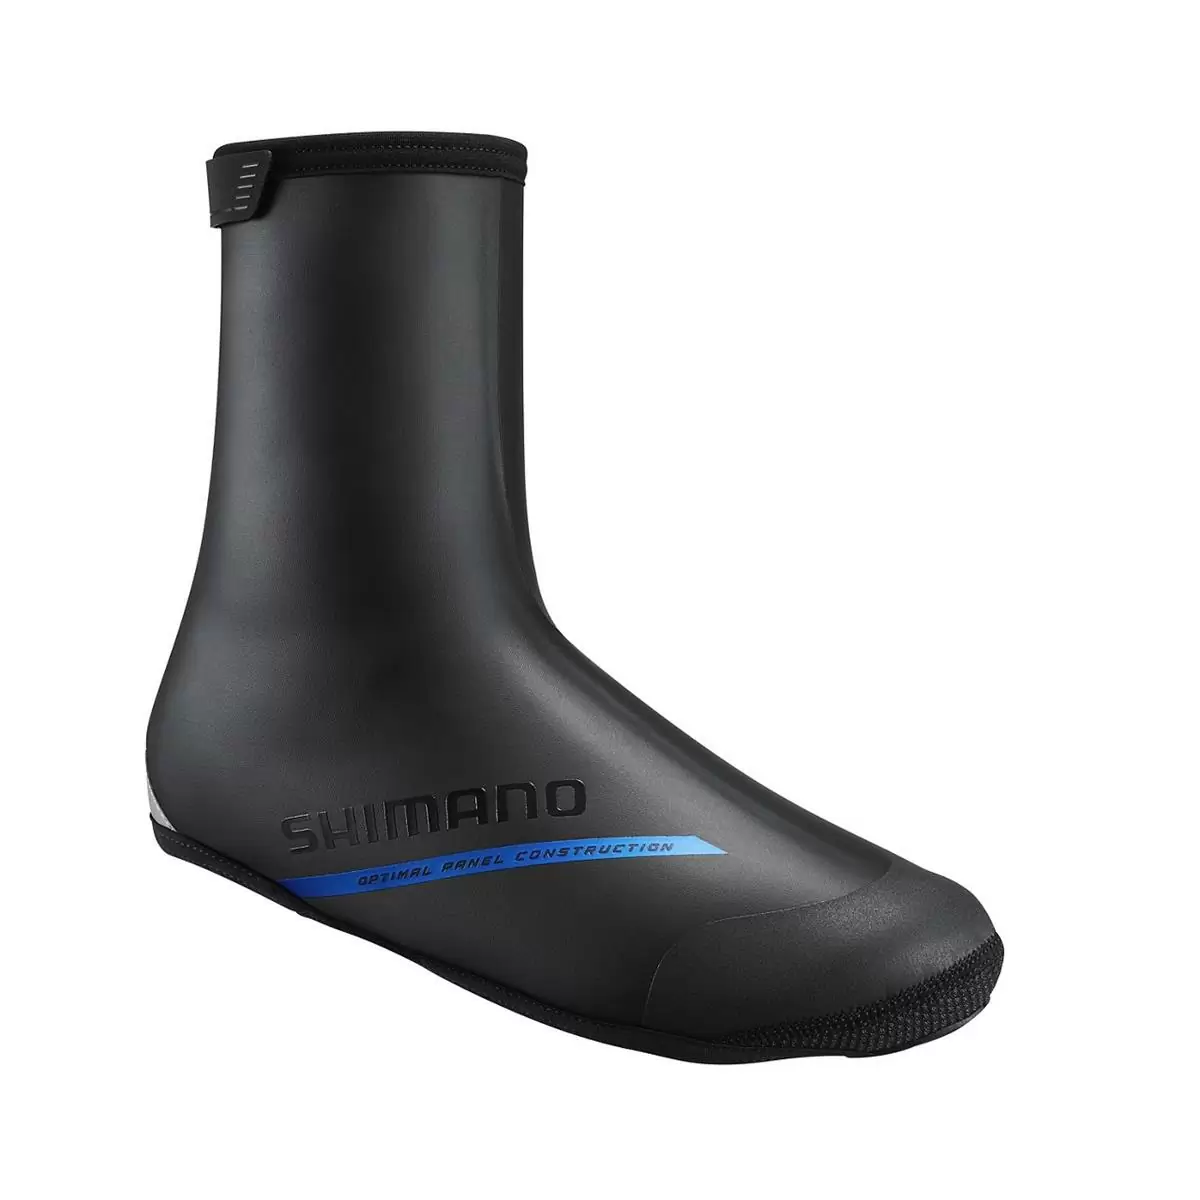 Pair of Winter Shoe Covers MTB Cross Country XC Waterproof Thermal Black Size M (40-42) - image